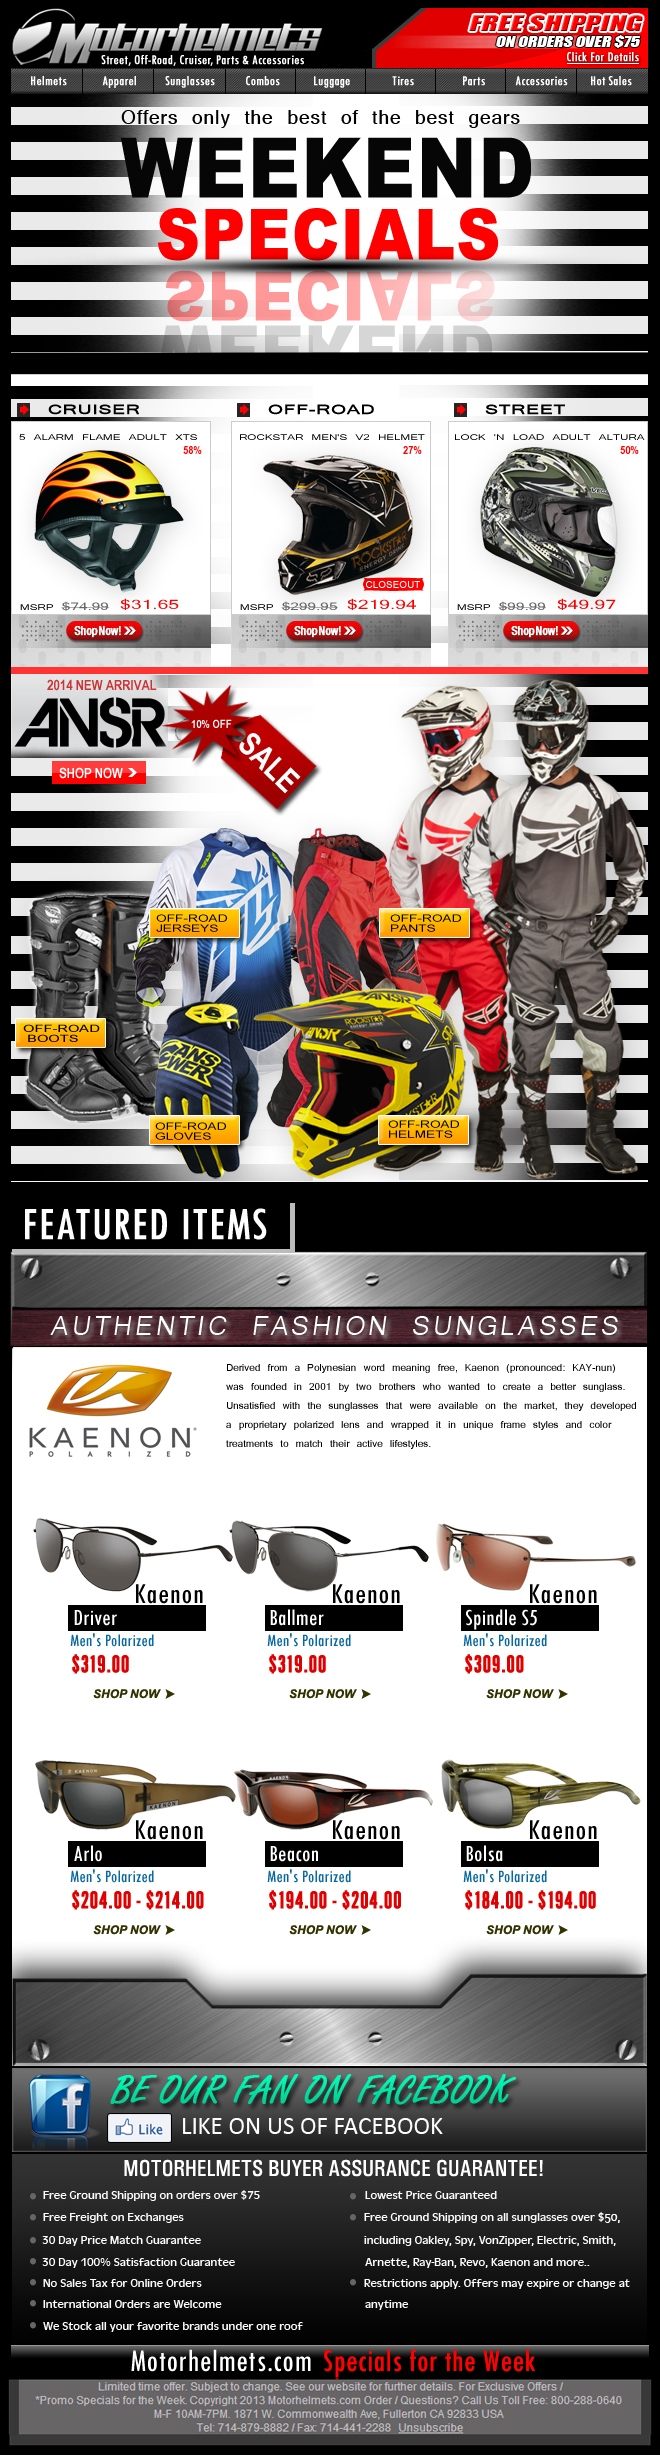 Gear-Fever...Closeout Helmets from FOX & Vega + New Arrivals from Answer!